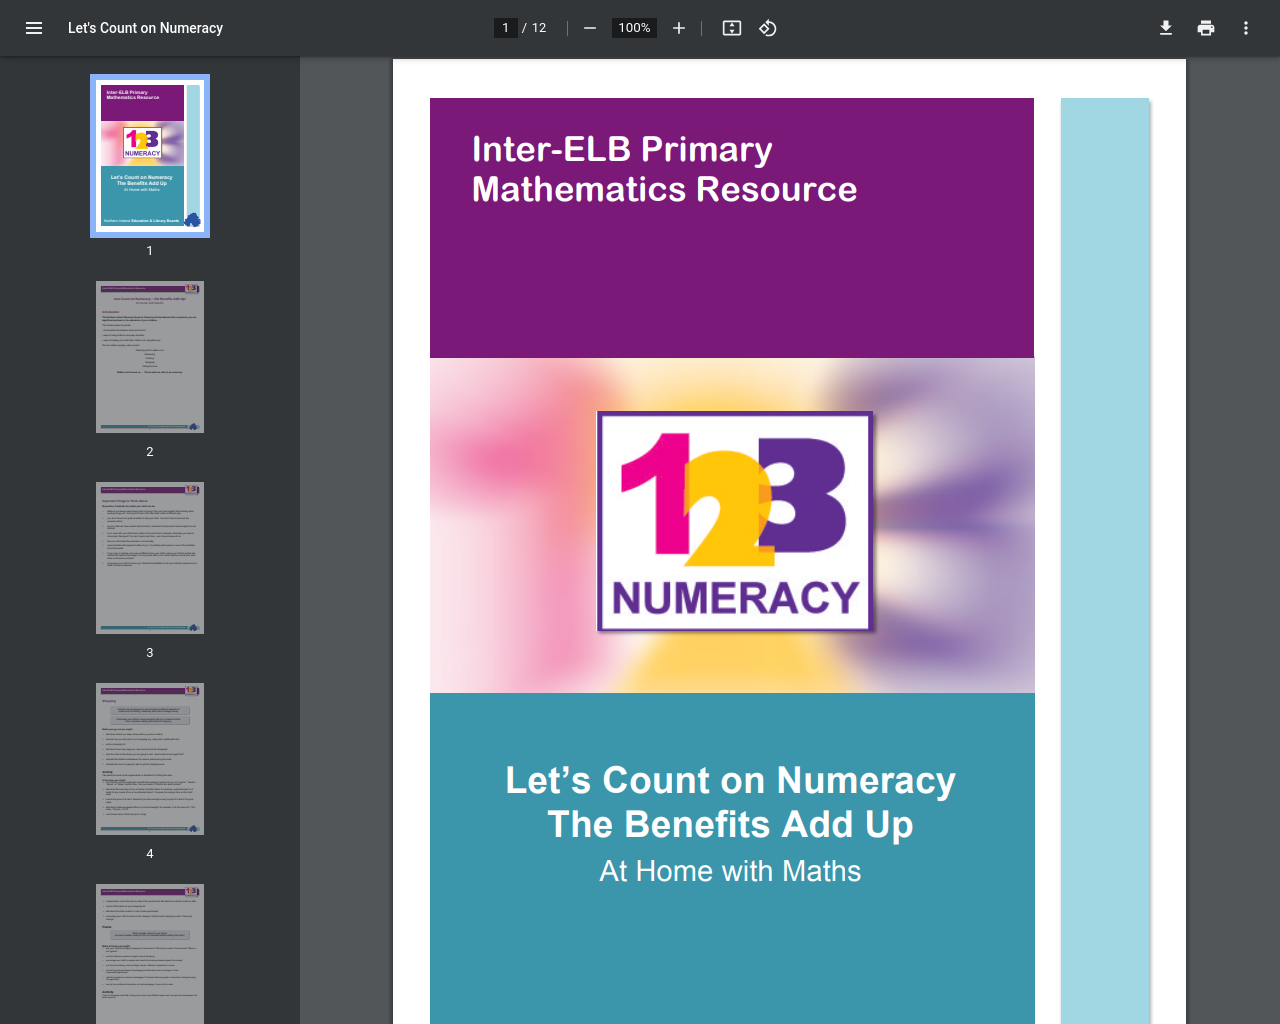 Let's Count on Numeracy